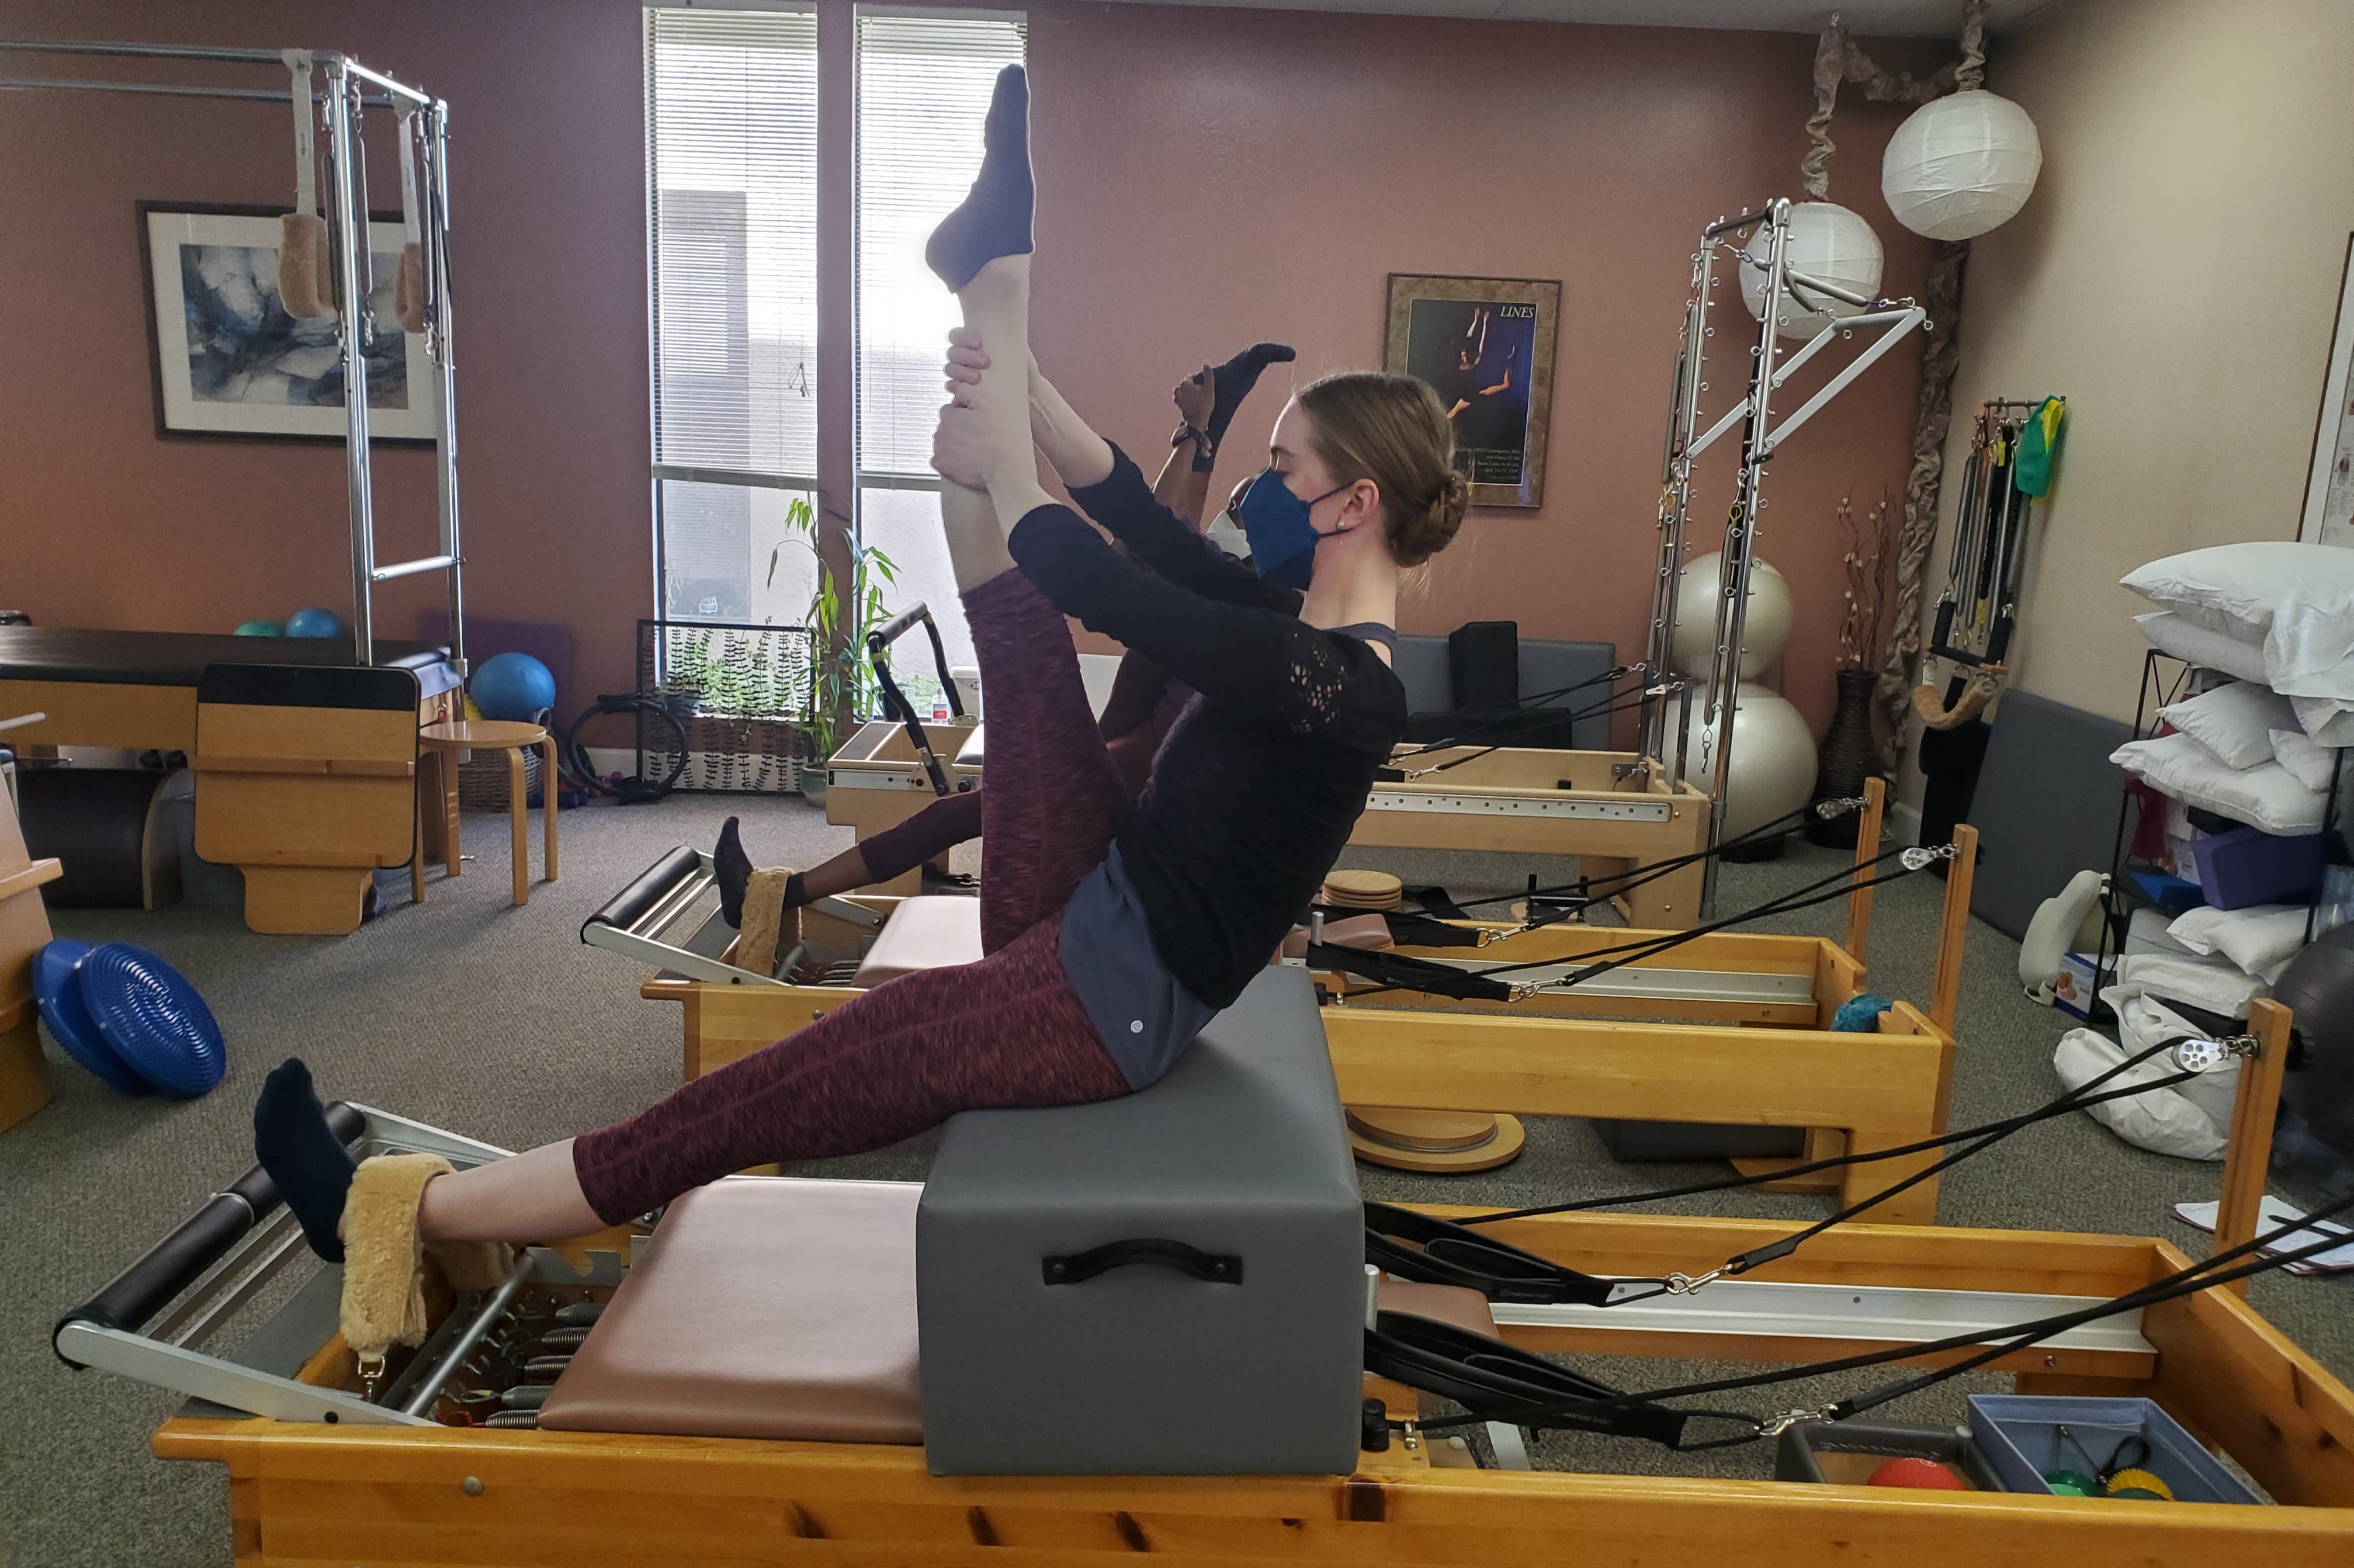 Align Reformer Pilates expands studio and celebrates with Open Day